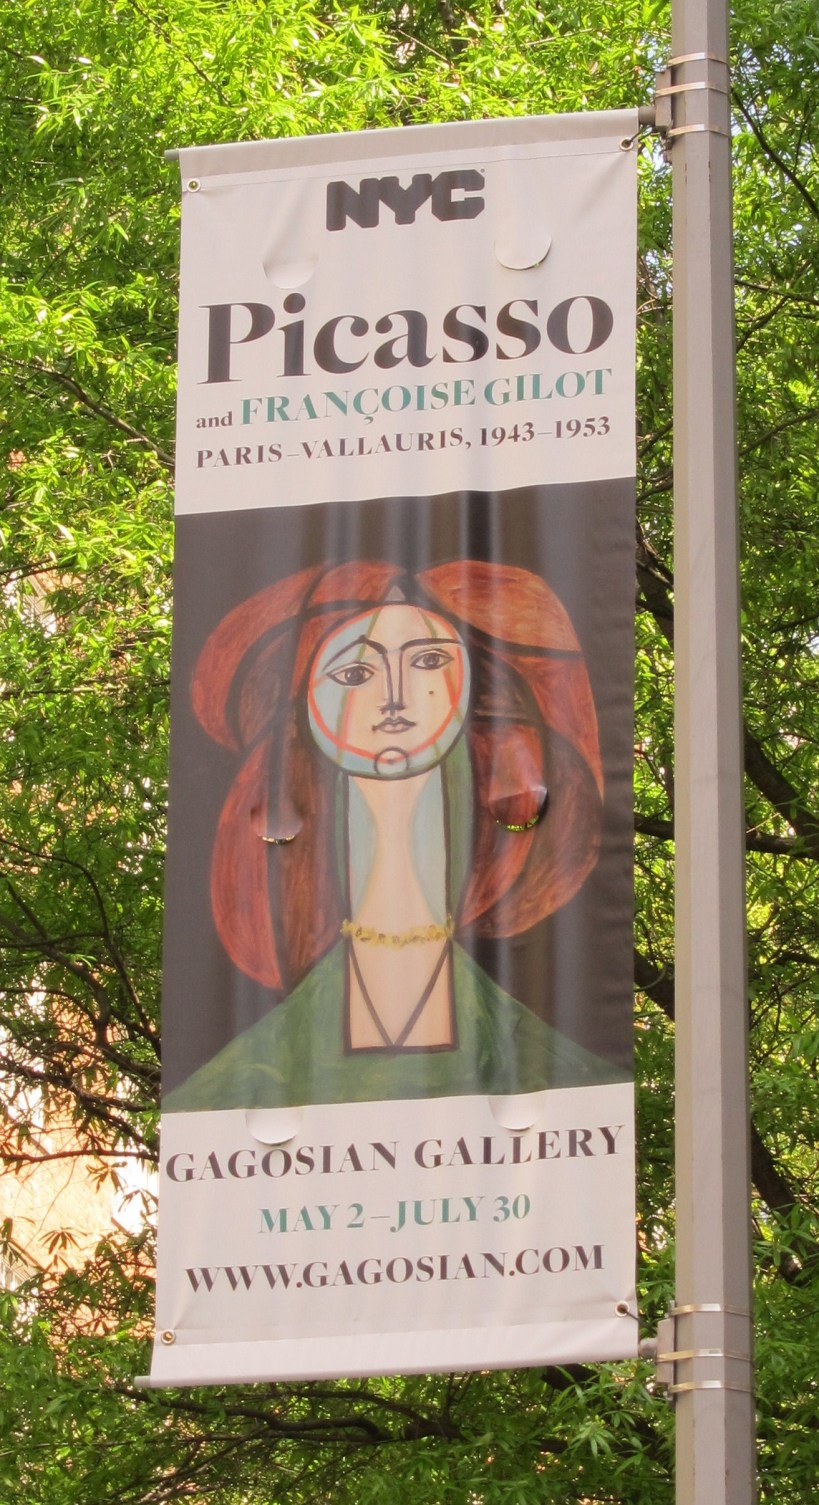 Picasso and Gilot exhibit poster